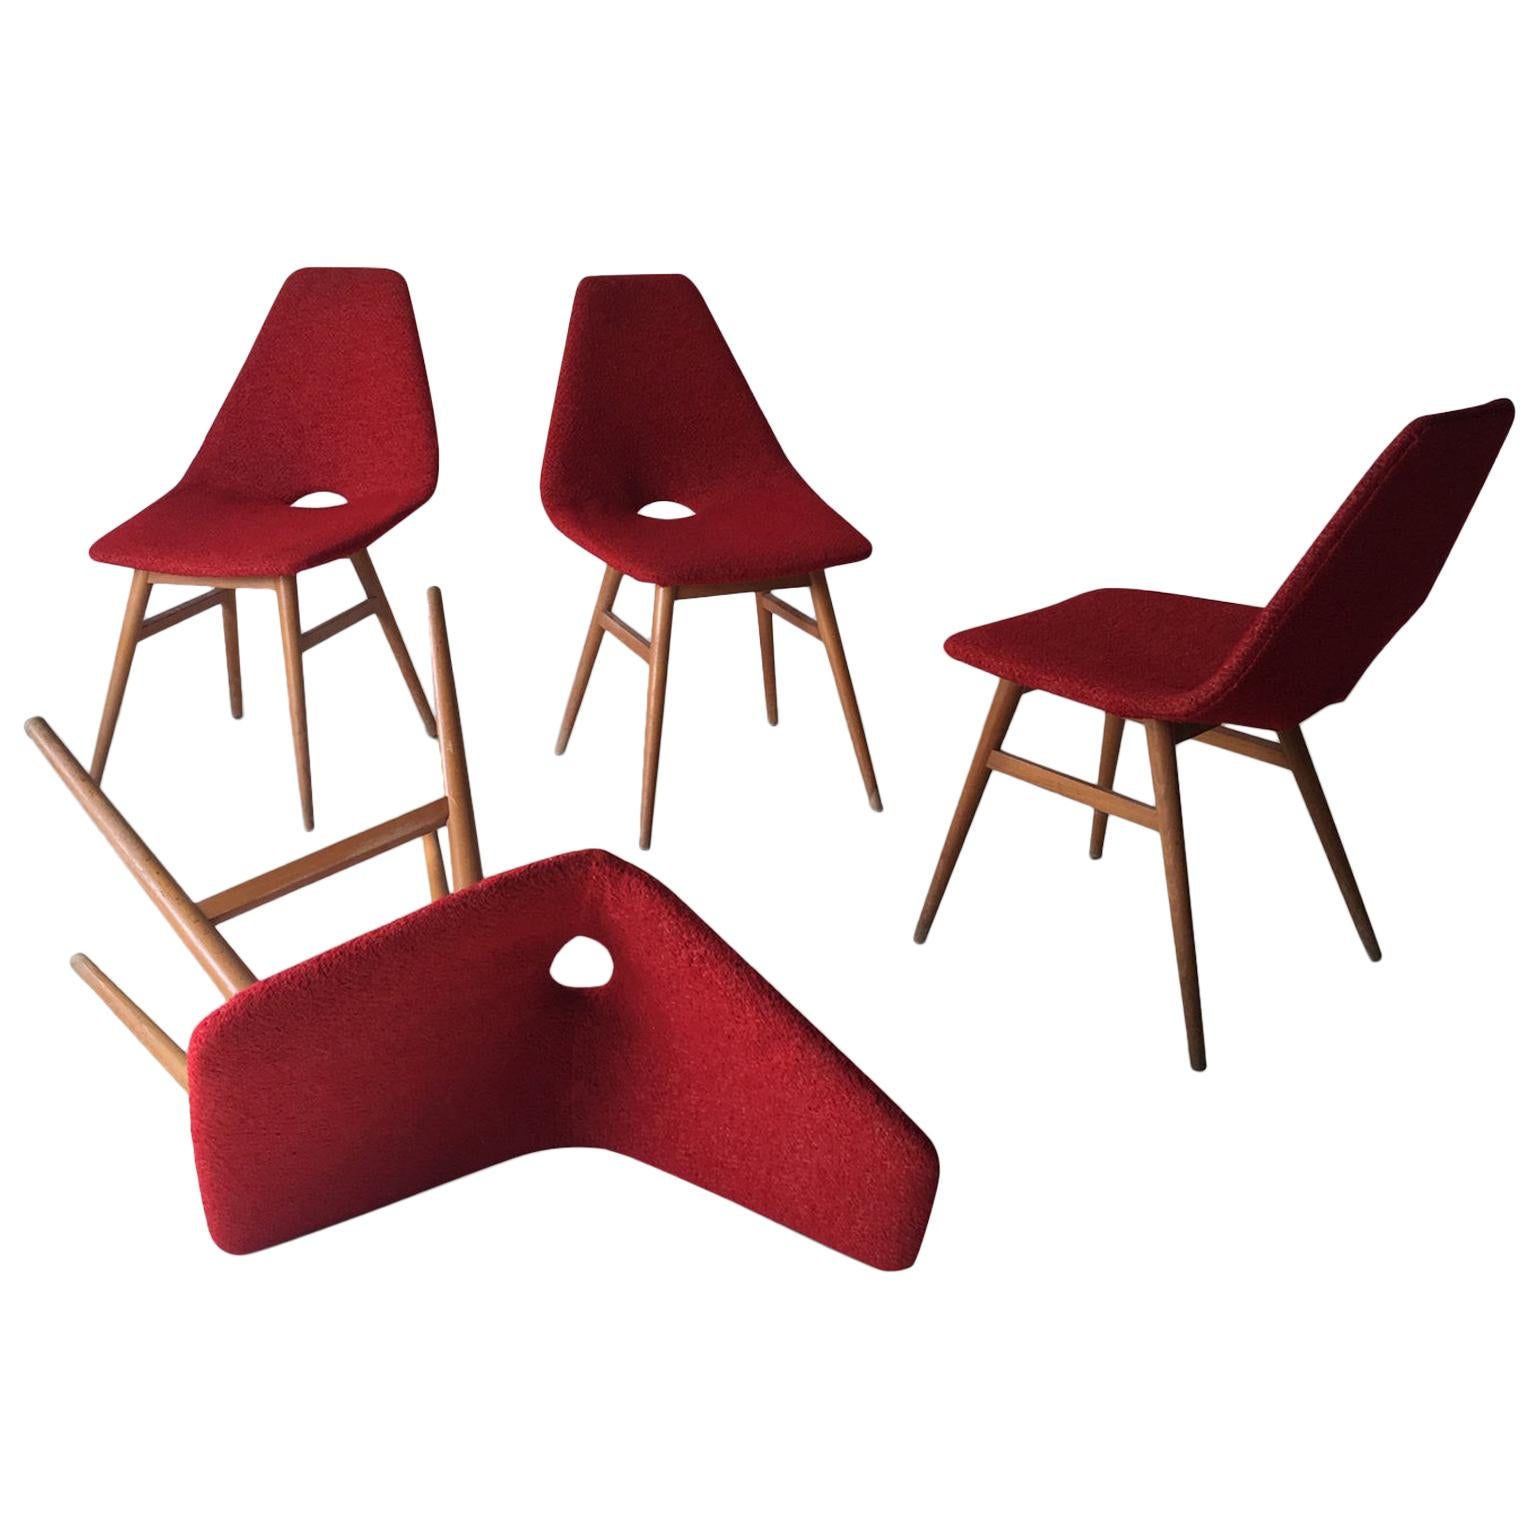 Midcentury Hungarian Chairs, Side Chairs by Judit Burian and Erika Szek, 1950s